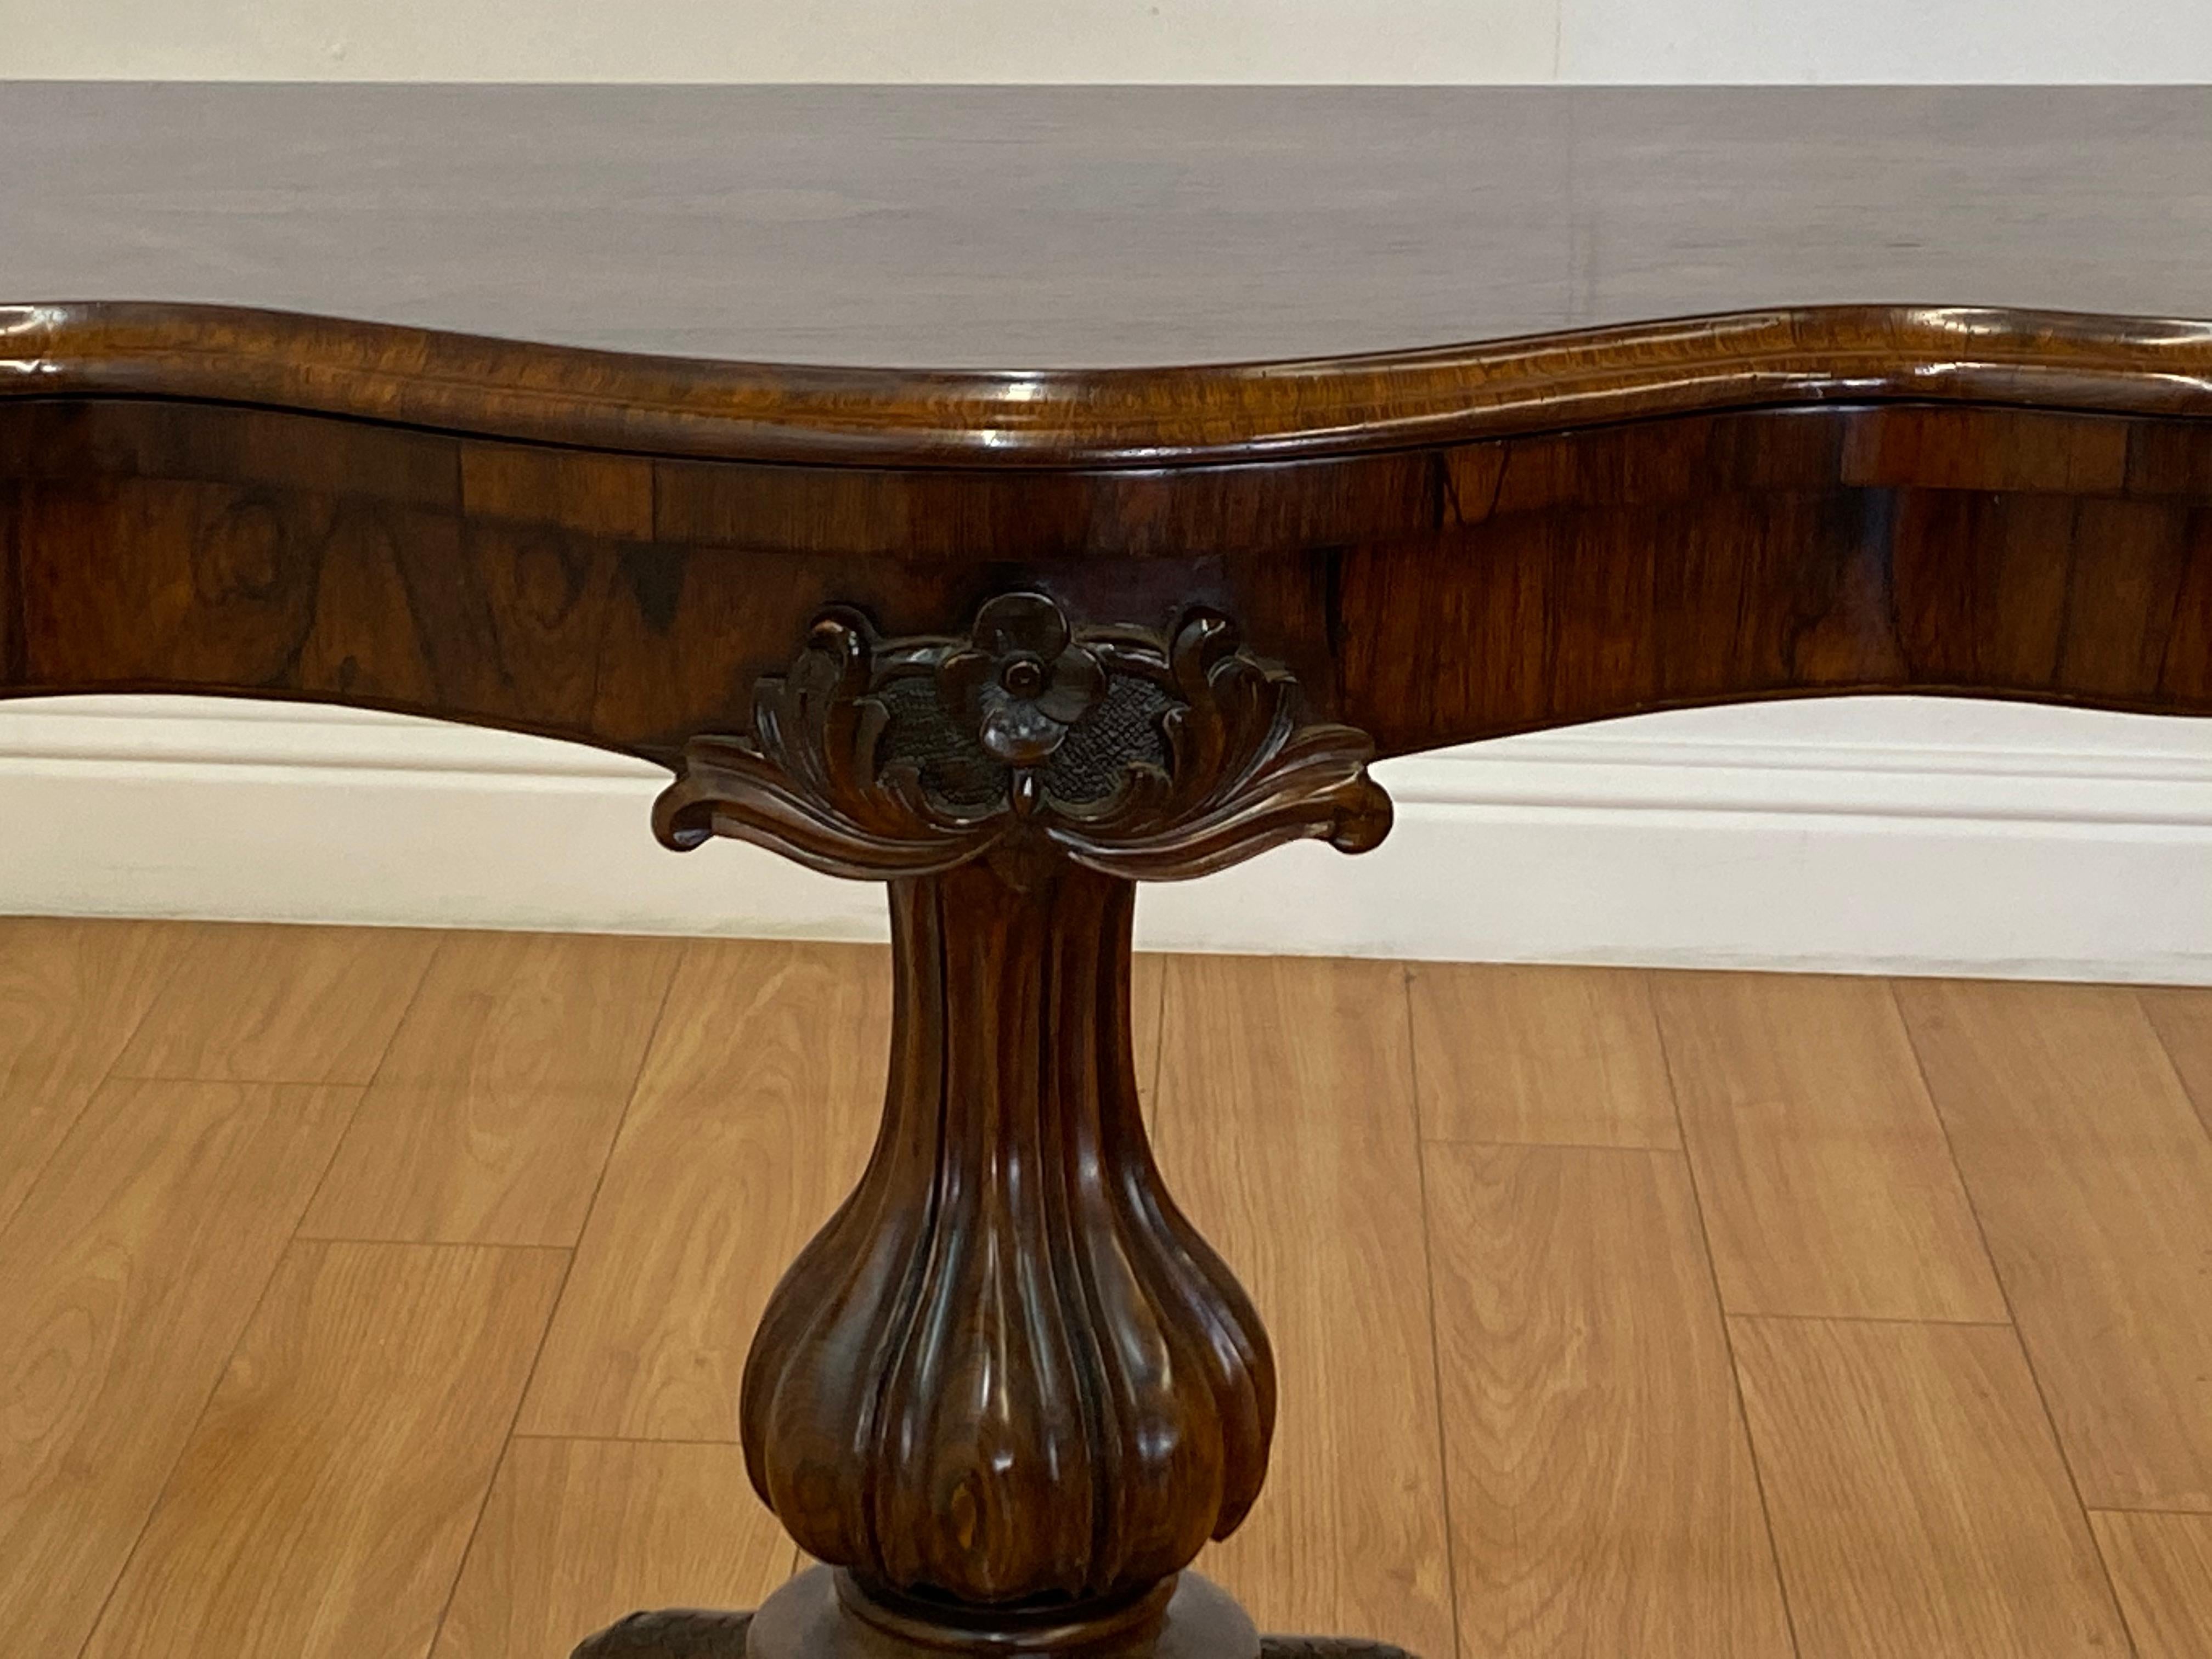 19th century hand carved rosewood console / games table c.1880

Handsome hand carved rosewood console that pivots and flips into a games table

A newer faux leather games table surface has been added (as found )

The gorgeous hand carved